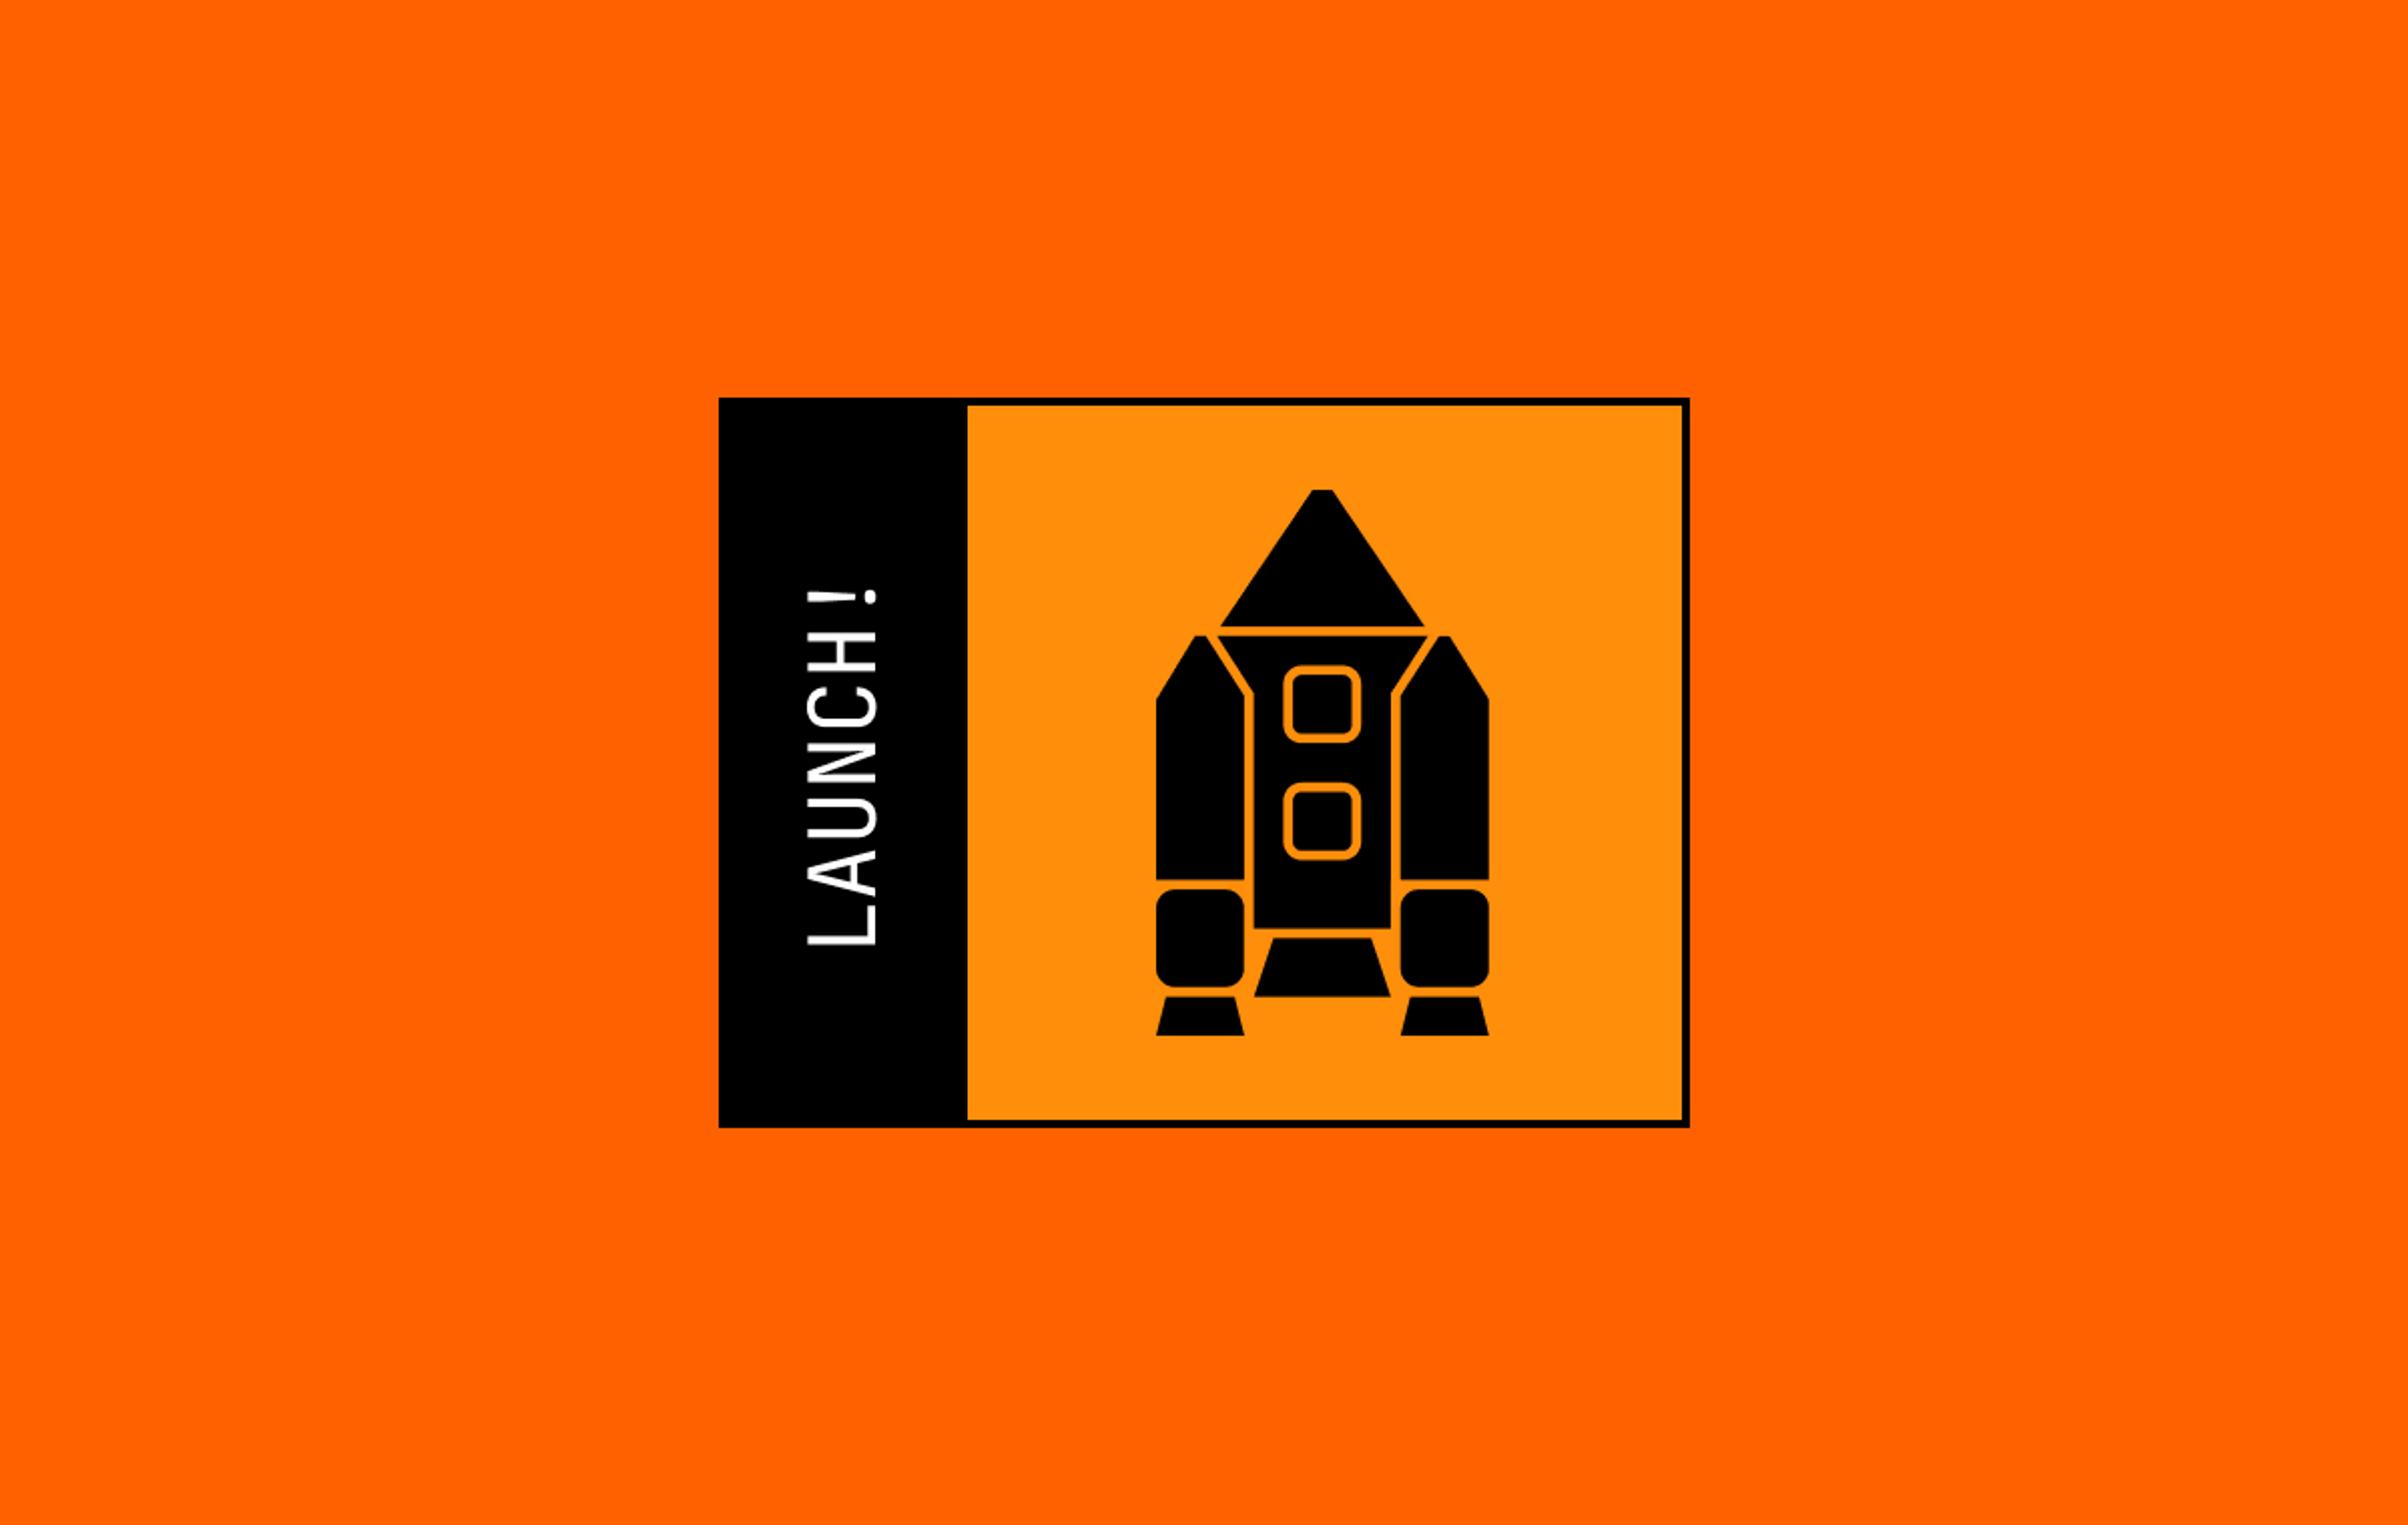 Symbol of rocket ship with the word "Launch!" written beside it. On an orange background.